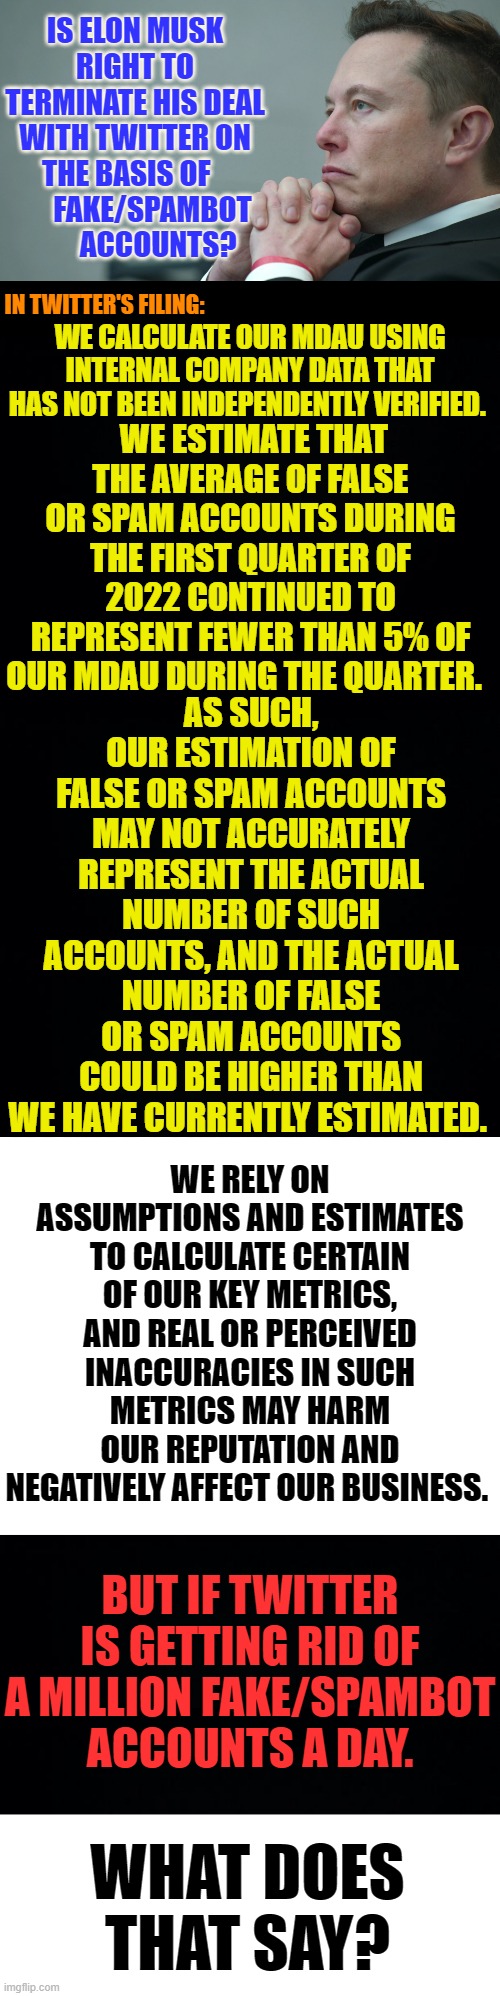 Any Opinions? |  IS ELON MUSK RIGHT TO TERMINATE HIS DEAL WITH TWITTER ON THE BASIS OF          FAKE/SPAMBOT         ACCOUNTS? IN TWITTER'S FILING:; WE CALCULATE OUR MDAU USING INTERNAL COMPANY DATA THAT HAS NOT BEEN INDEPENDENTLY VERIFIED. WE ESTIMATE THAT THE AVERAGE OF FALSE OR SPAM ACCOUNTS DURING THE FIRST QUARTER OF 2022 CONTINUED TO REPRESENT FEWER THAN 5% OF OUR MDAU DURING THE QUARTER. AS SUCH, OUR ESTIMATION OF FALSE OR SPAM ACCOUNTS MAY NOT ACCURATELY REPRESENT THE ACTUAL NUMBER OF SUCH ACCOUNTS, AND THE ACTUAL NUMBER OF FALSE OR SPAM ACCOUNTS COULD BE HIGHER THAN WE HAVE CURRENTLY ESTIMATED. WE RELY ON ASSUMPTIONS AND ESTIMATES TO CALCULATE CERTAIN OF OUR KEY METRICS, AND REAL OR PERCEIVED INACCURACIES IN SUCH METRICS MAY HARM OUR REPUTATION AND NEGATIVELY AFFECT OUR BUSINESS. BUT IF TWITTER IS GETTING RID OF A MILLION FAKE/SPAMBOT ACCOUNTS A DAY. WHAT DOES THAT SAY? | image tagged in memes,politics,elon musk,bro im out of here,twitter,deal | made w/ Imgflip meme maker